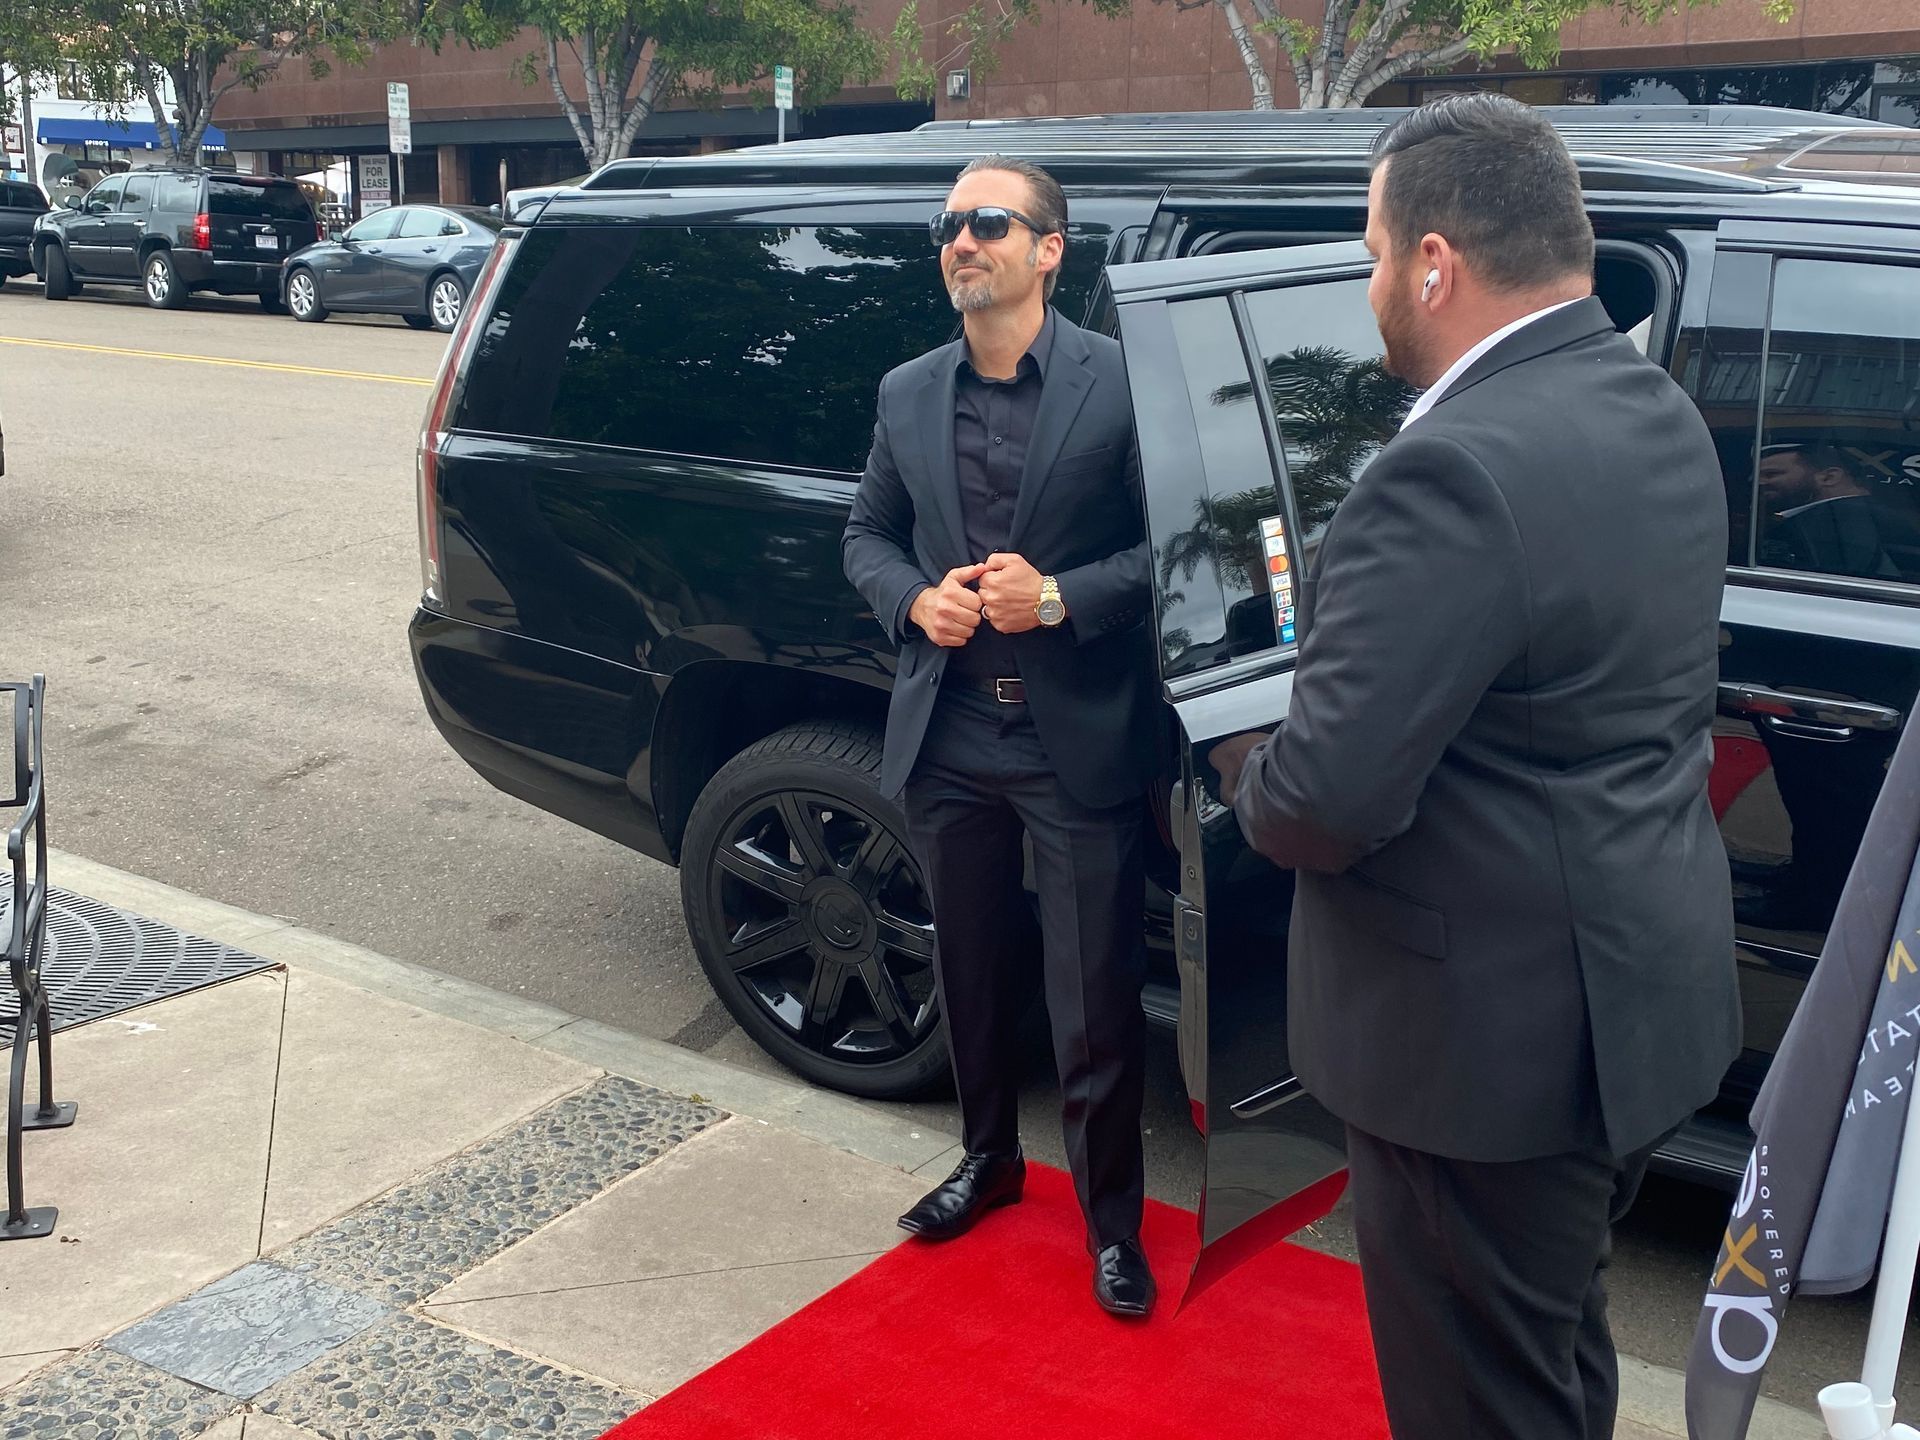 two men in suits are standing next to a black suv on a red carpet .